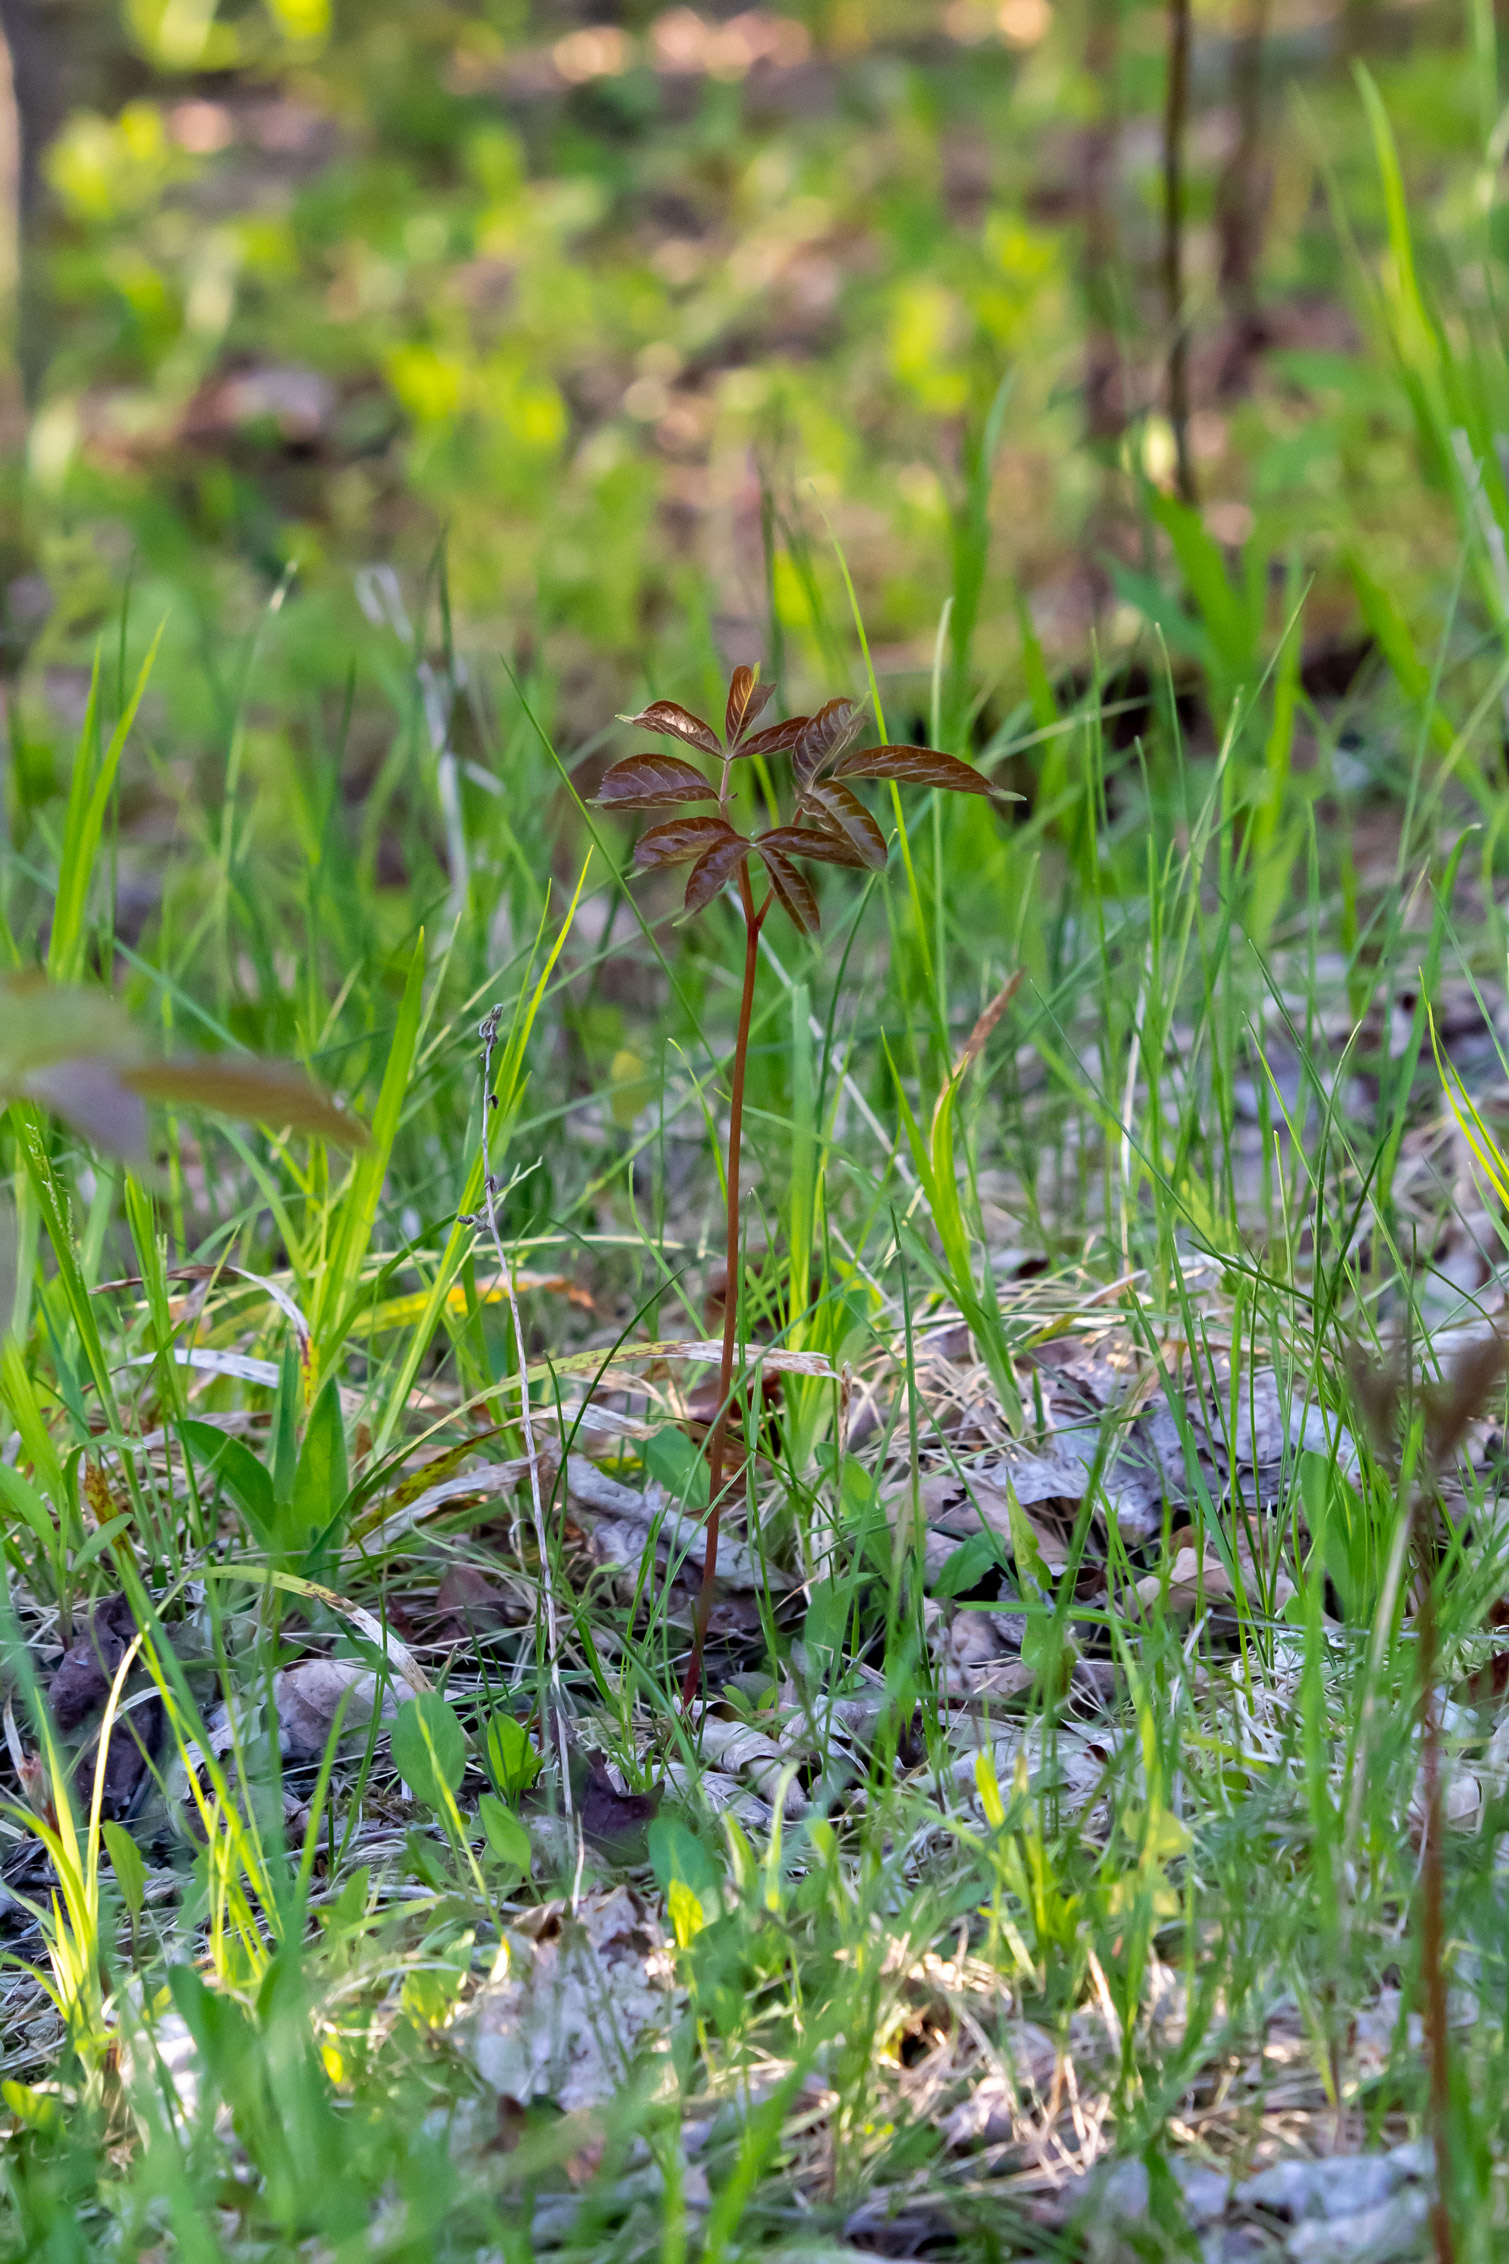 Small red-coloured tree springing from the ground